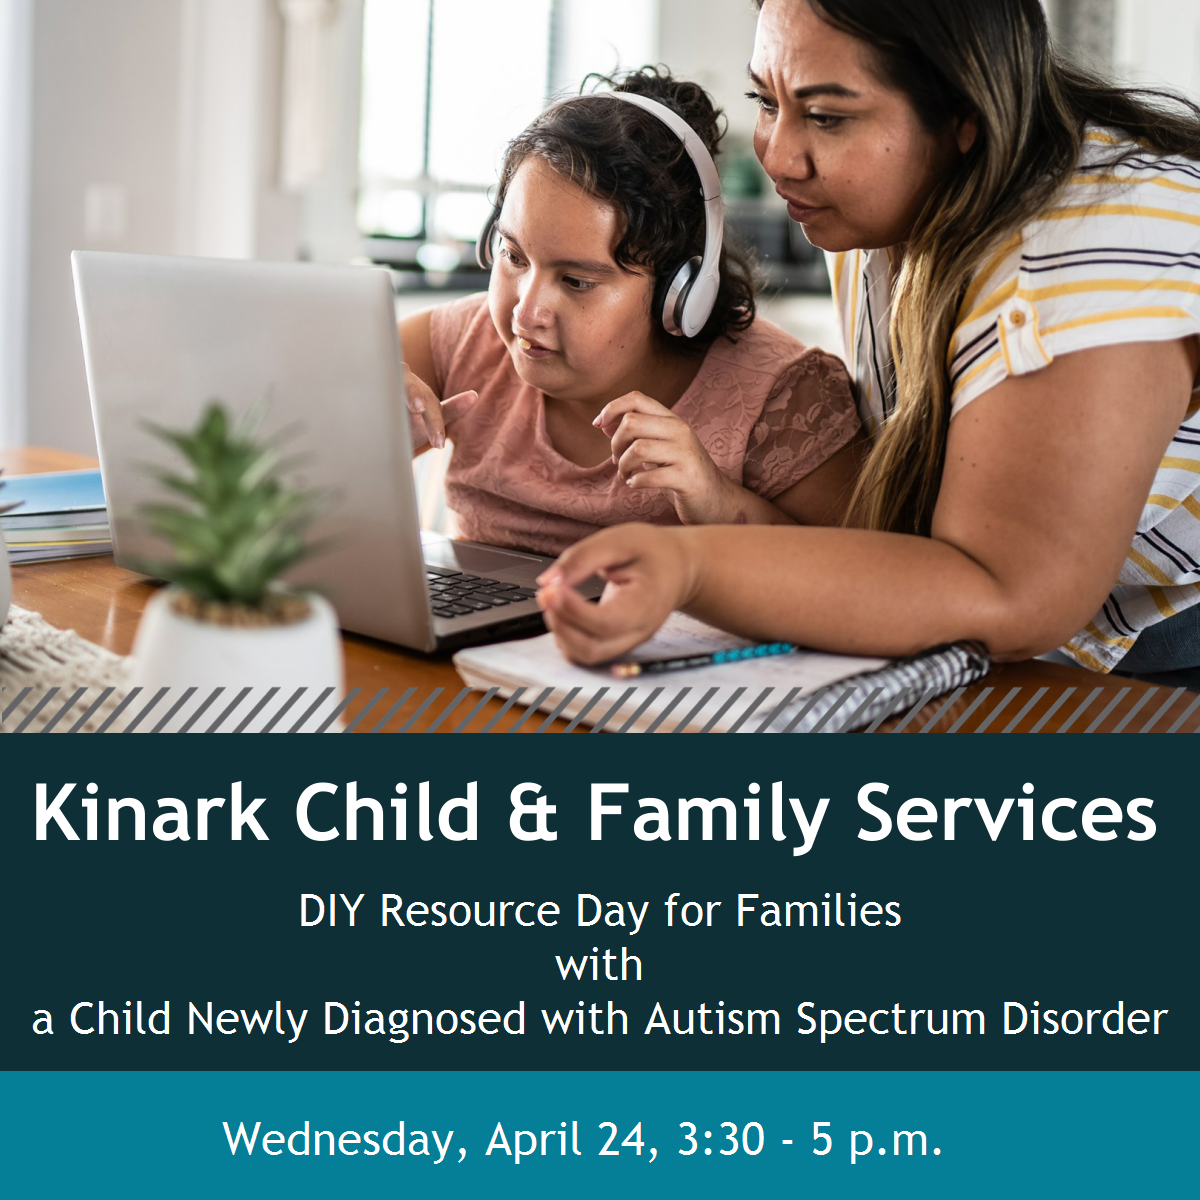 Kinark DIY Resource Day for Families with a child newly diagnosed with Autism Spectrum Disorder - Wednesday April 24, 3:30 - 5 p.m.